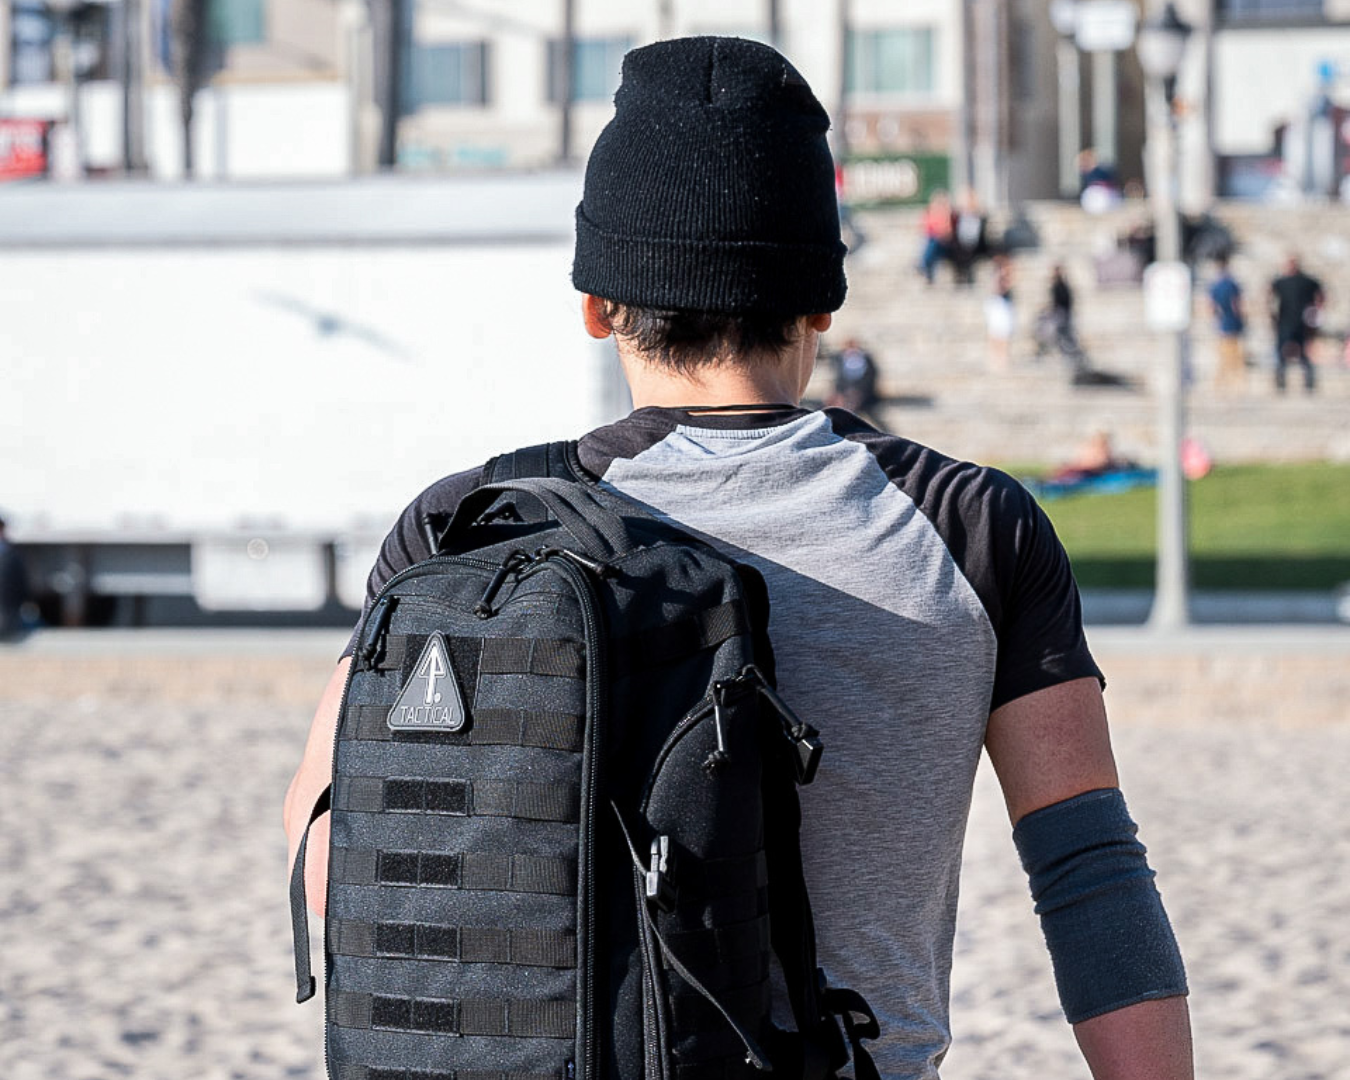 Tactical Gear in Urban Life: Surprising Uses You Haven't Thought Of